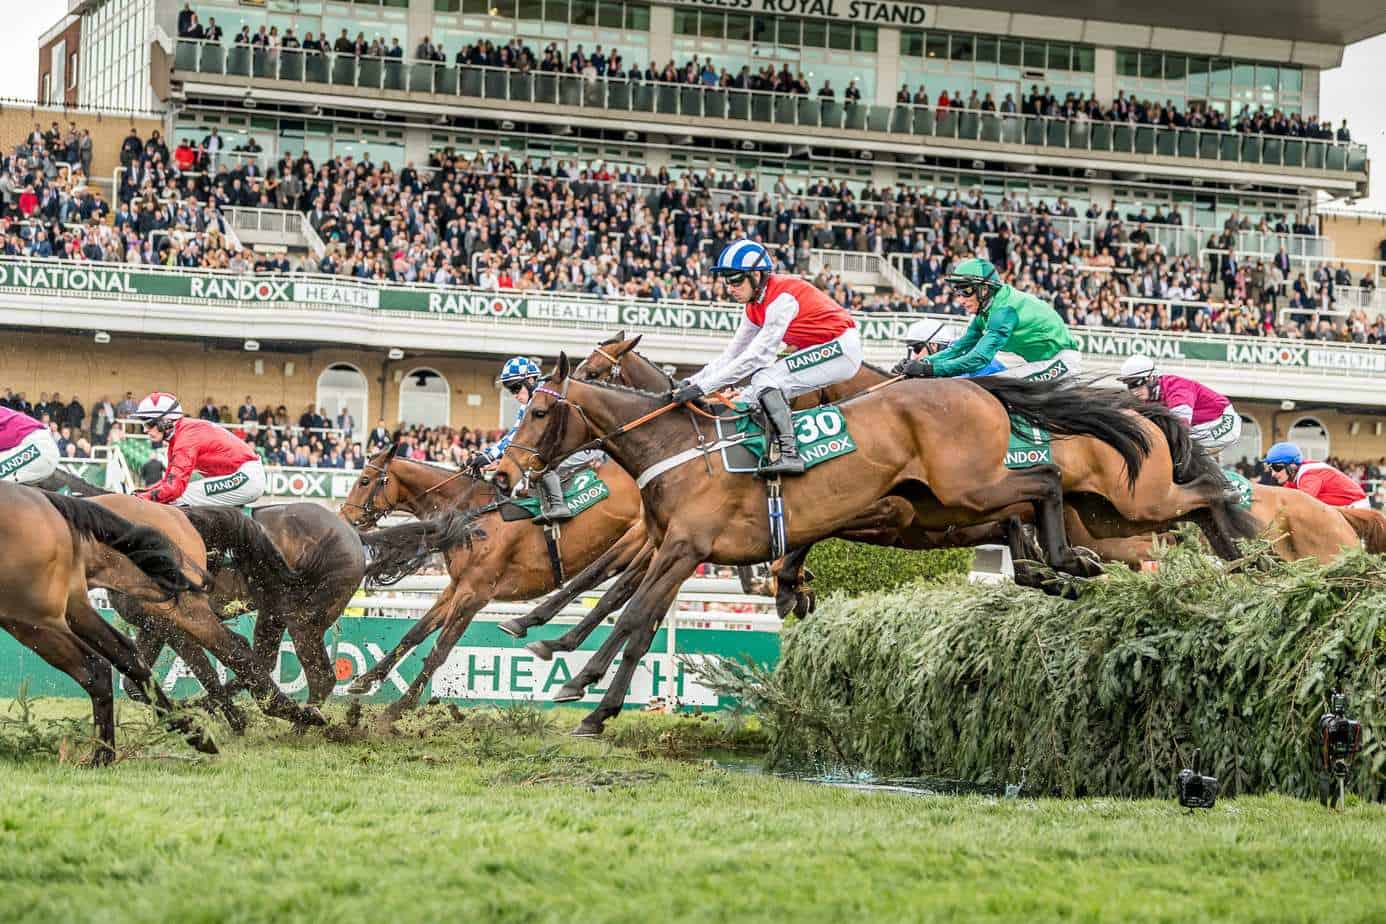 2022 Grand National – Preview and Betting Odds